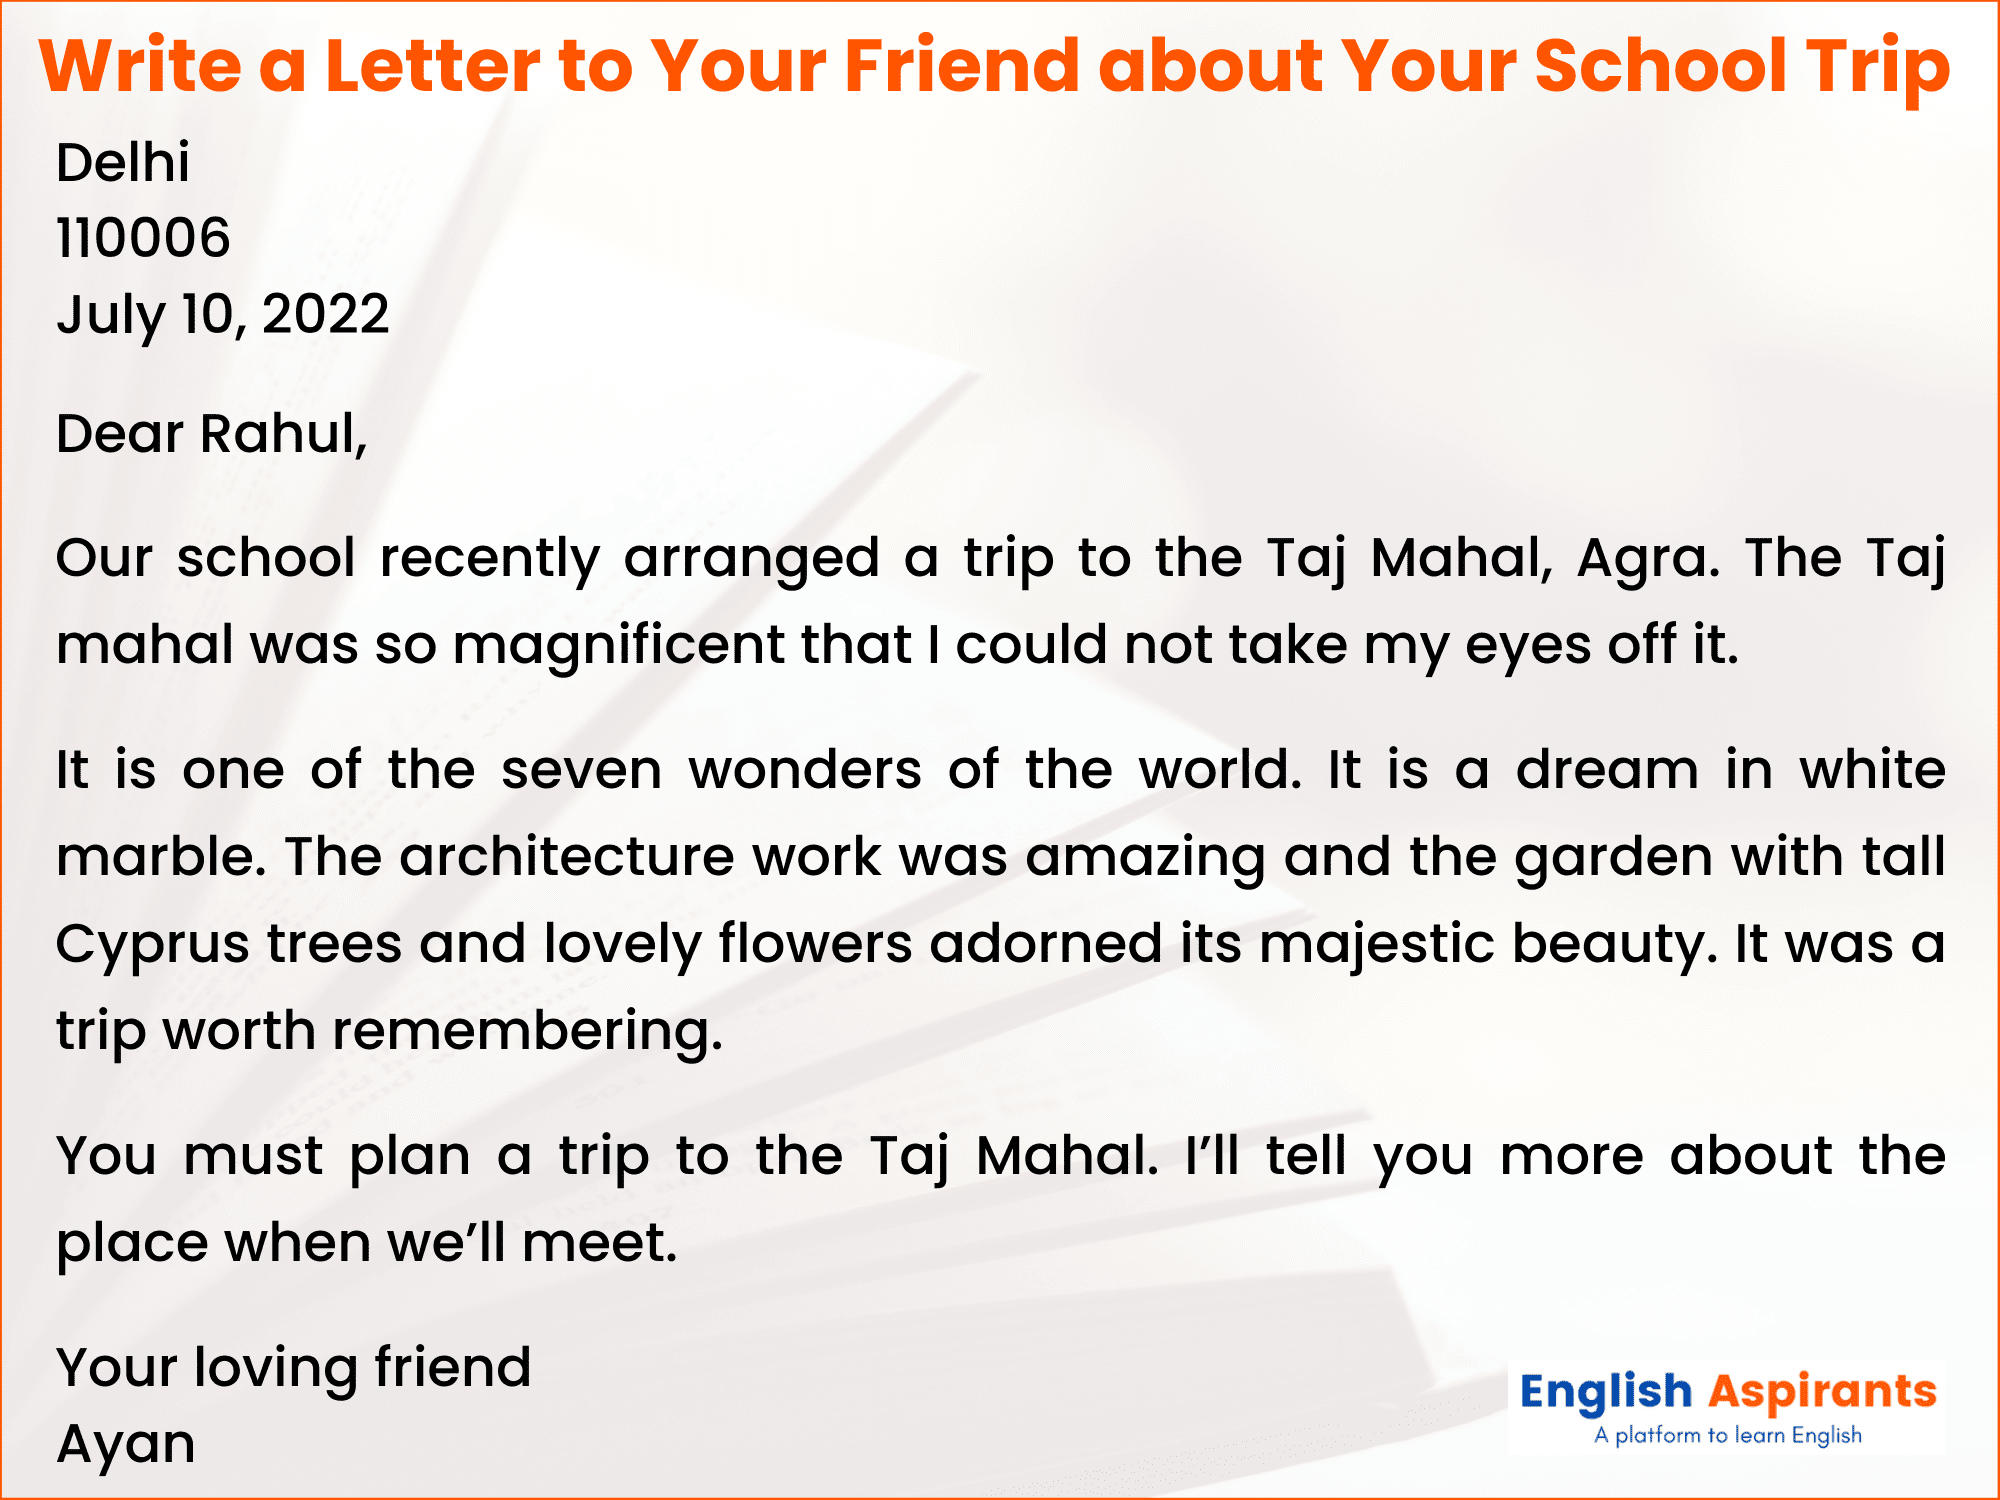 Write a letter to your friend about your school trip